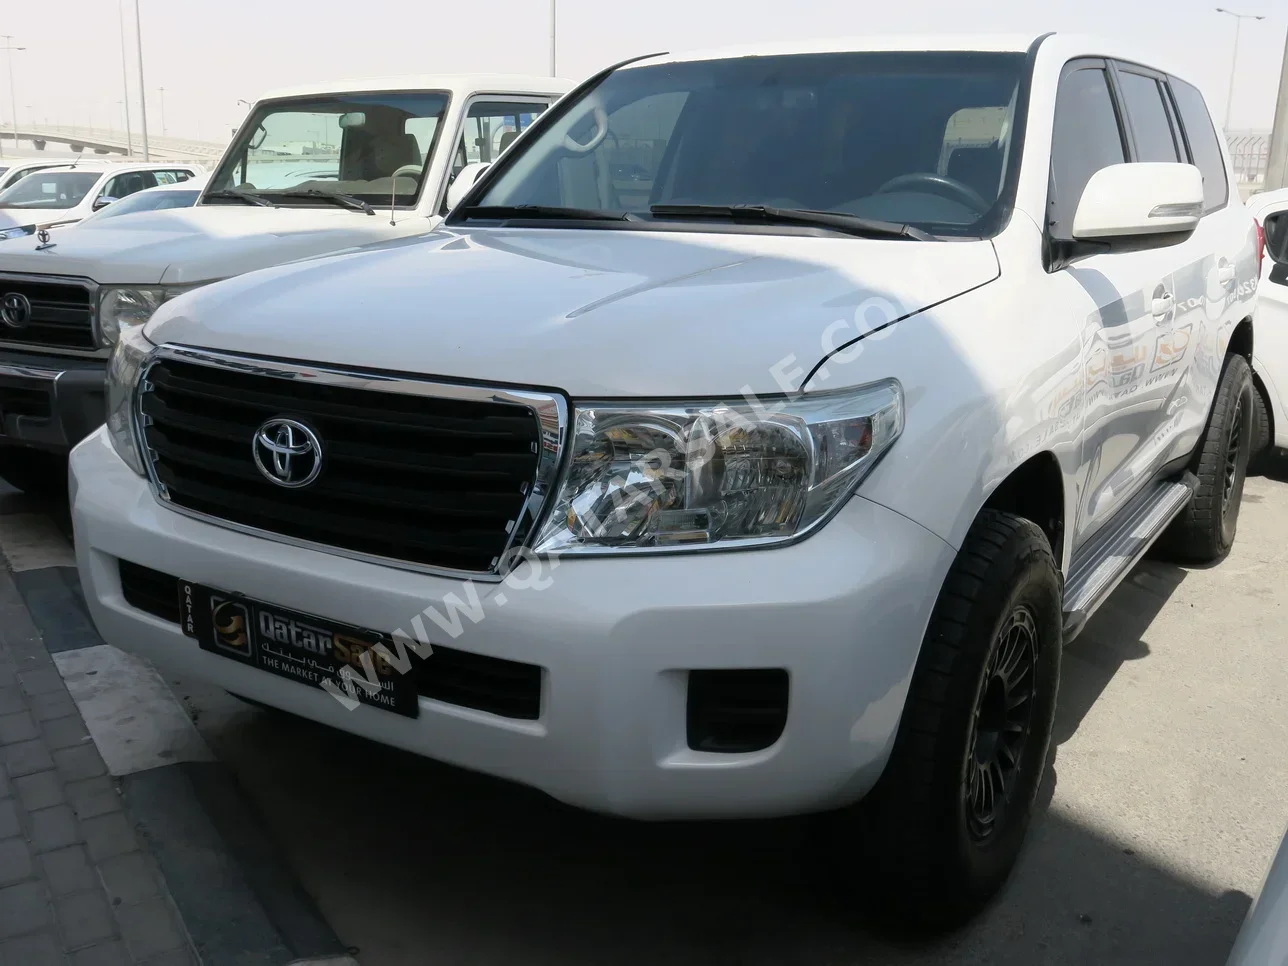  Toyota  Land Cruiser  G  2014  Automatic  276,000 Km  6 Cylinder  Four Wheel Drive (4WD)  SUV  White  With Warranty